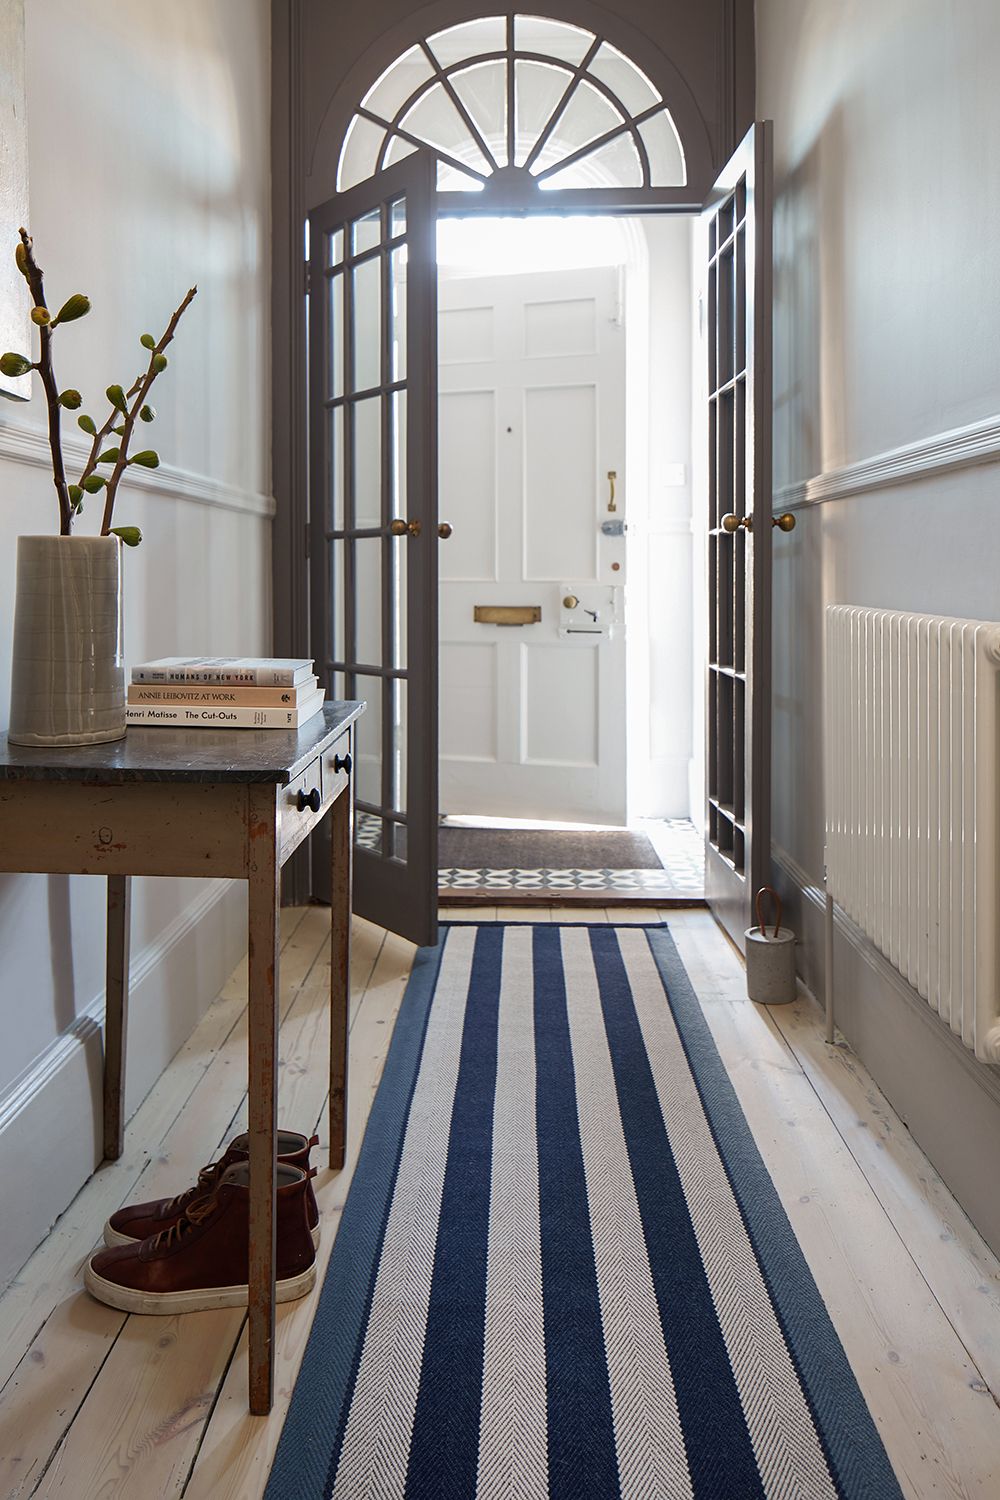 Hallway Rugs 10 Ideas To Add Style, How To Use Runner Rugs